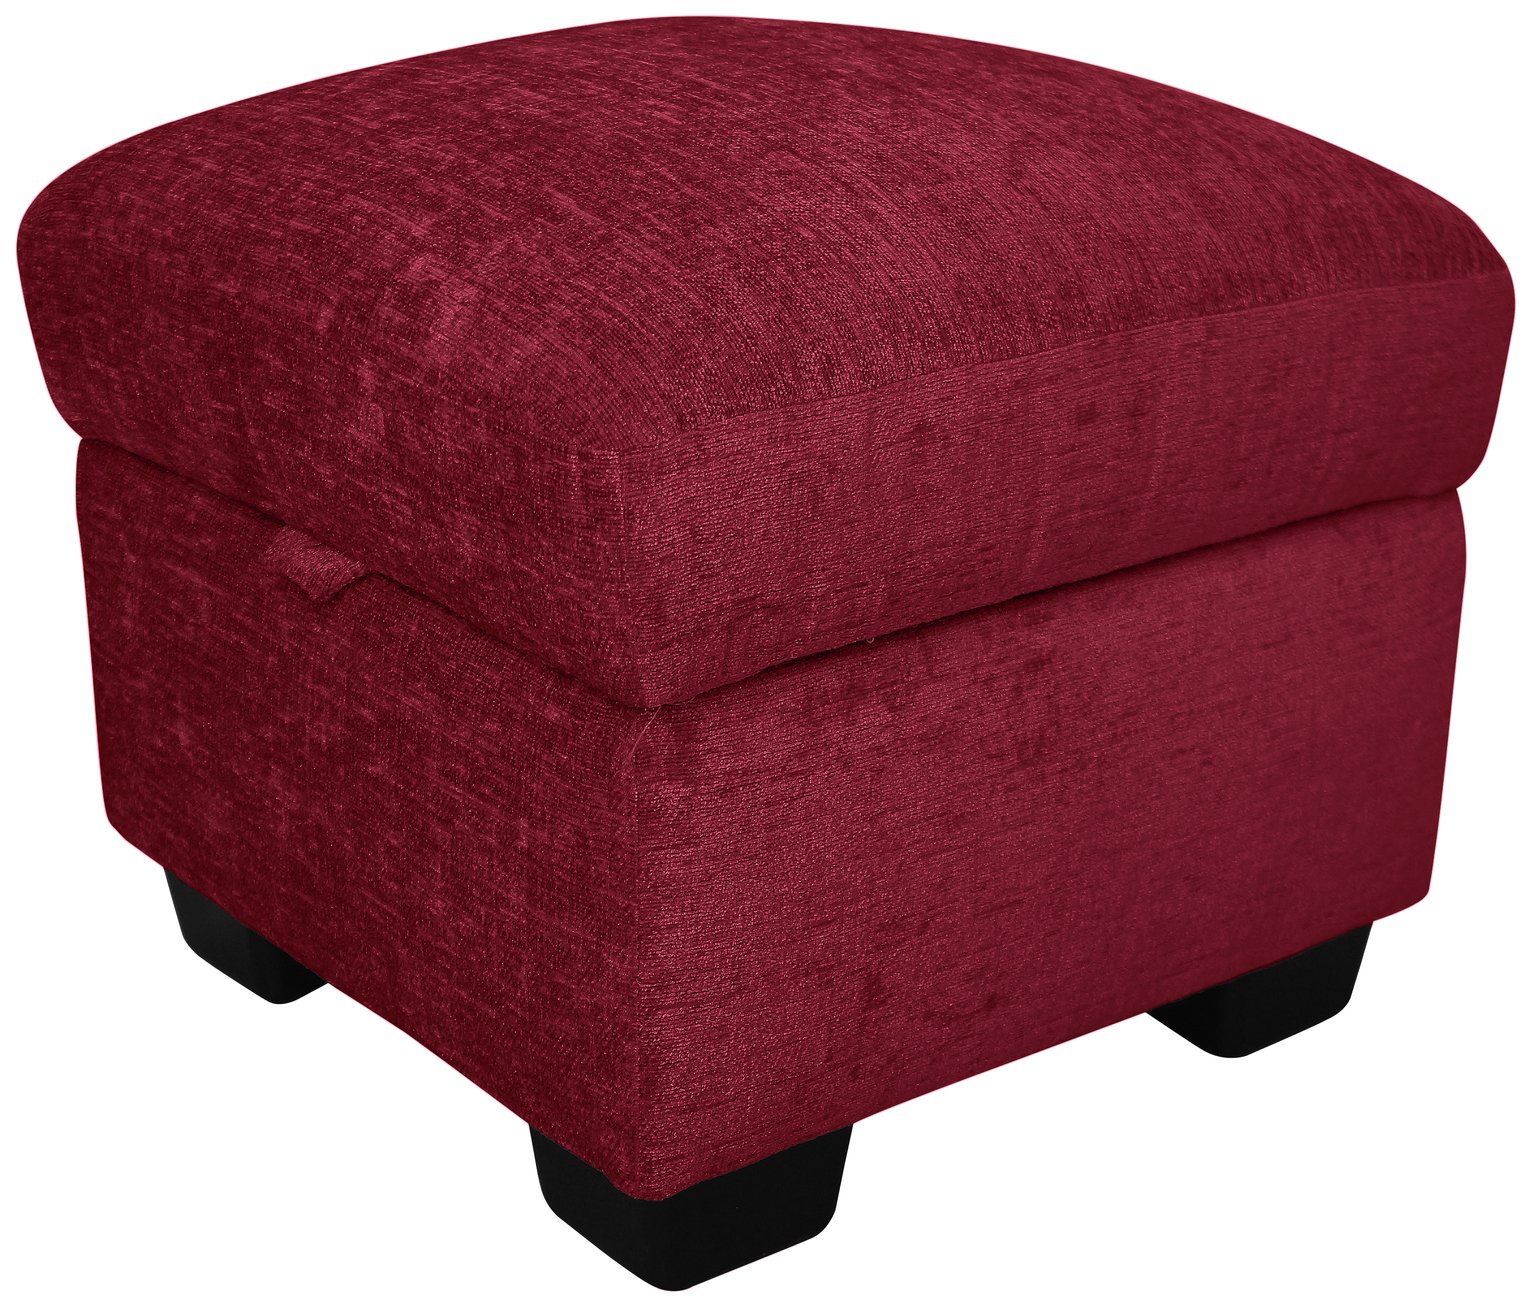 Argos Home Tammy Fabric Storage Footstool review